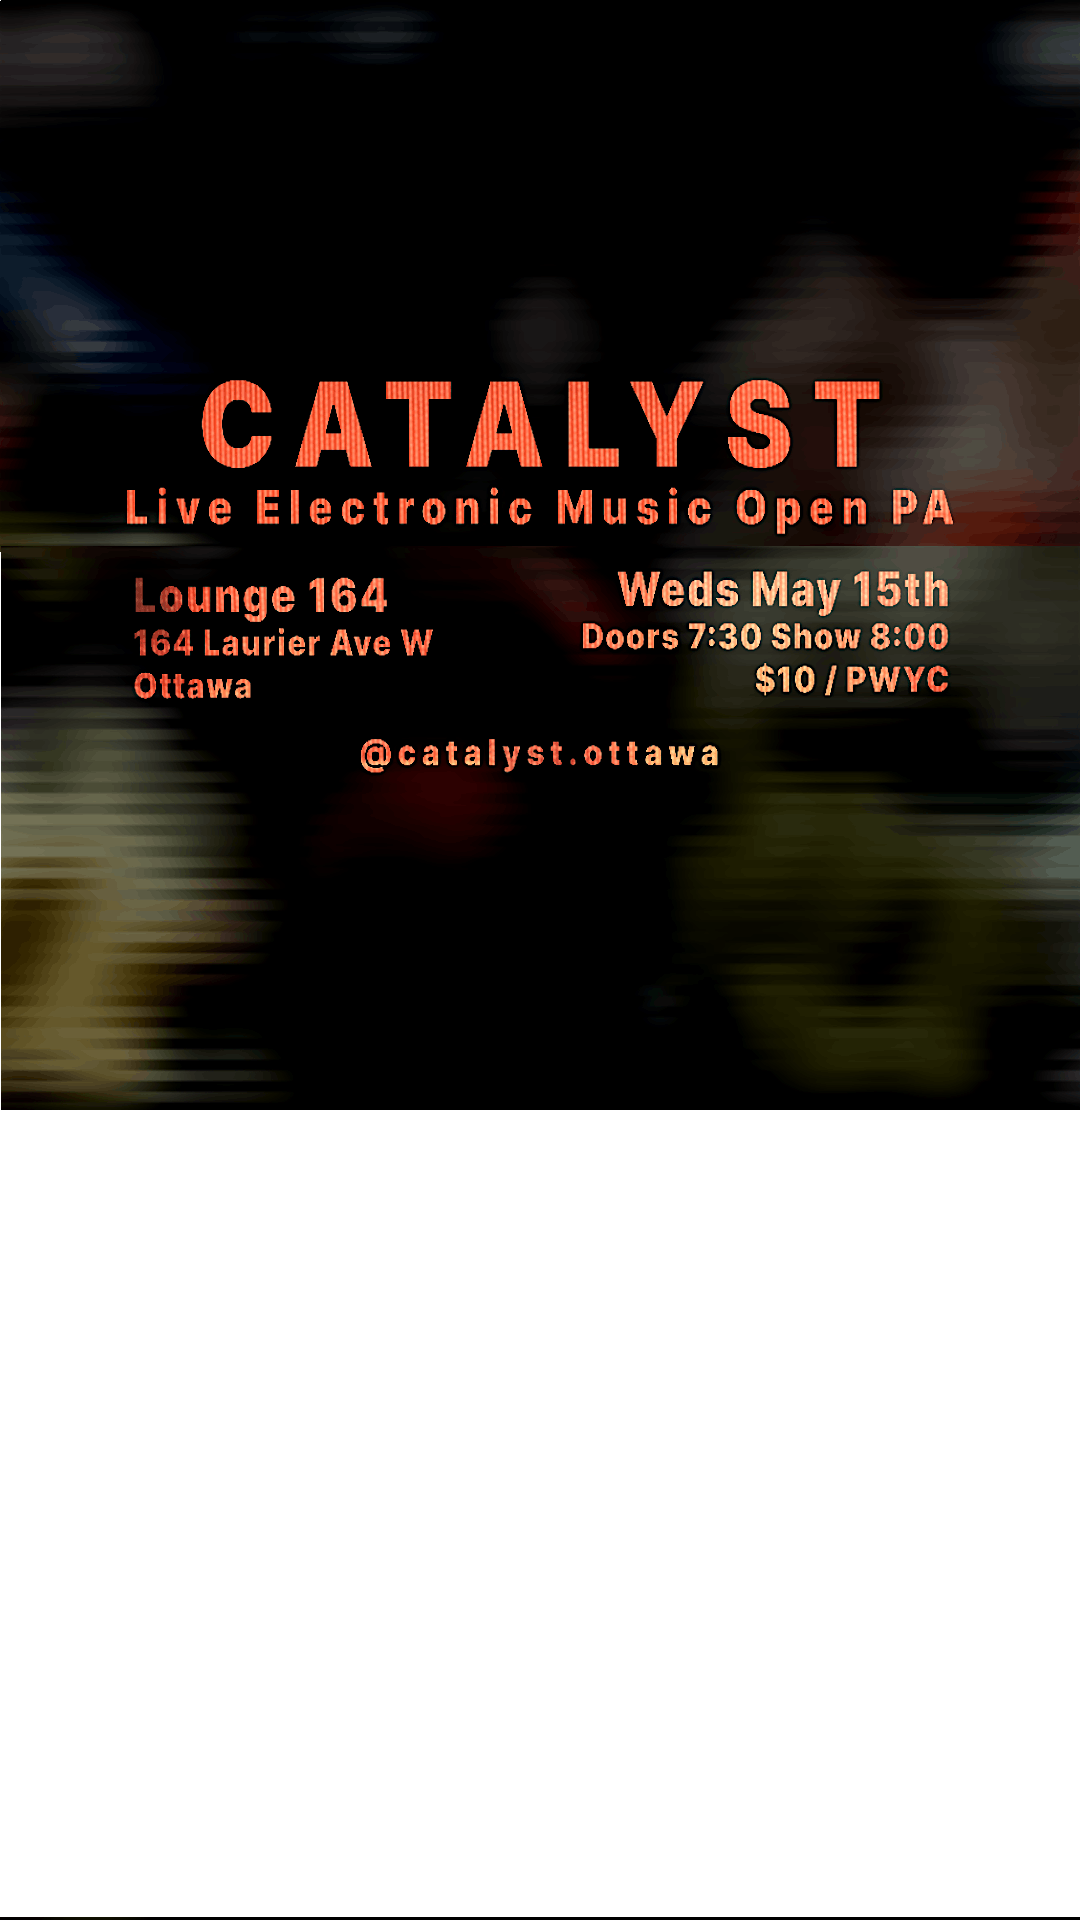 Catalyst 3 Live Electronic Music Open PA